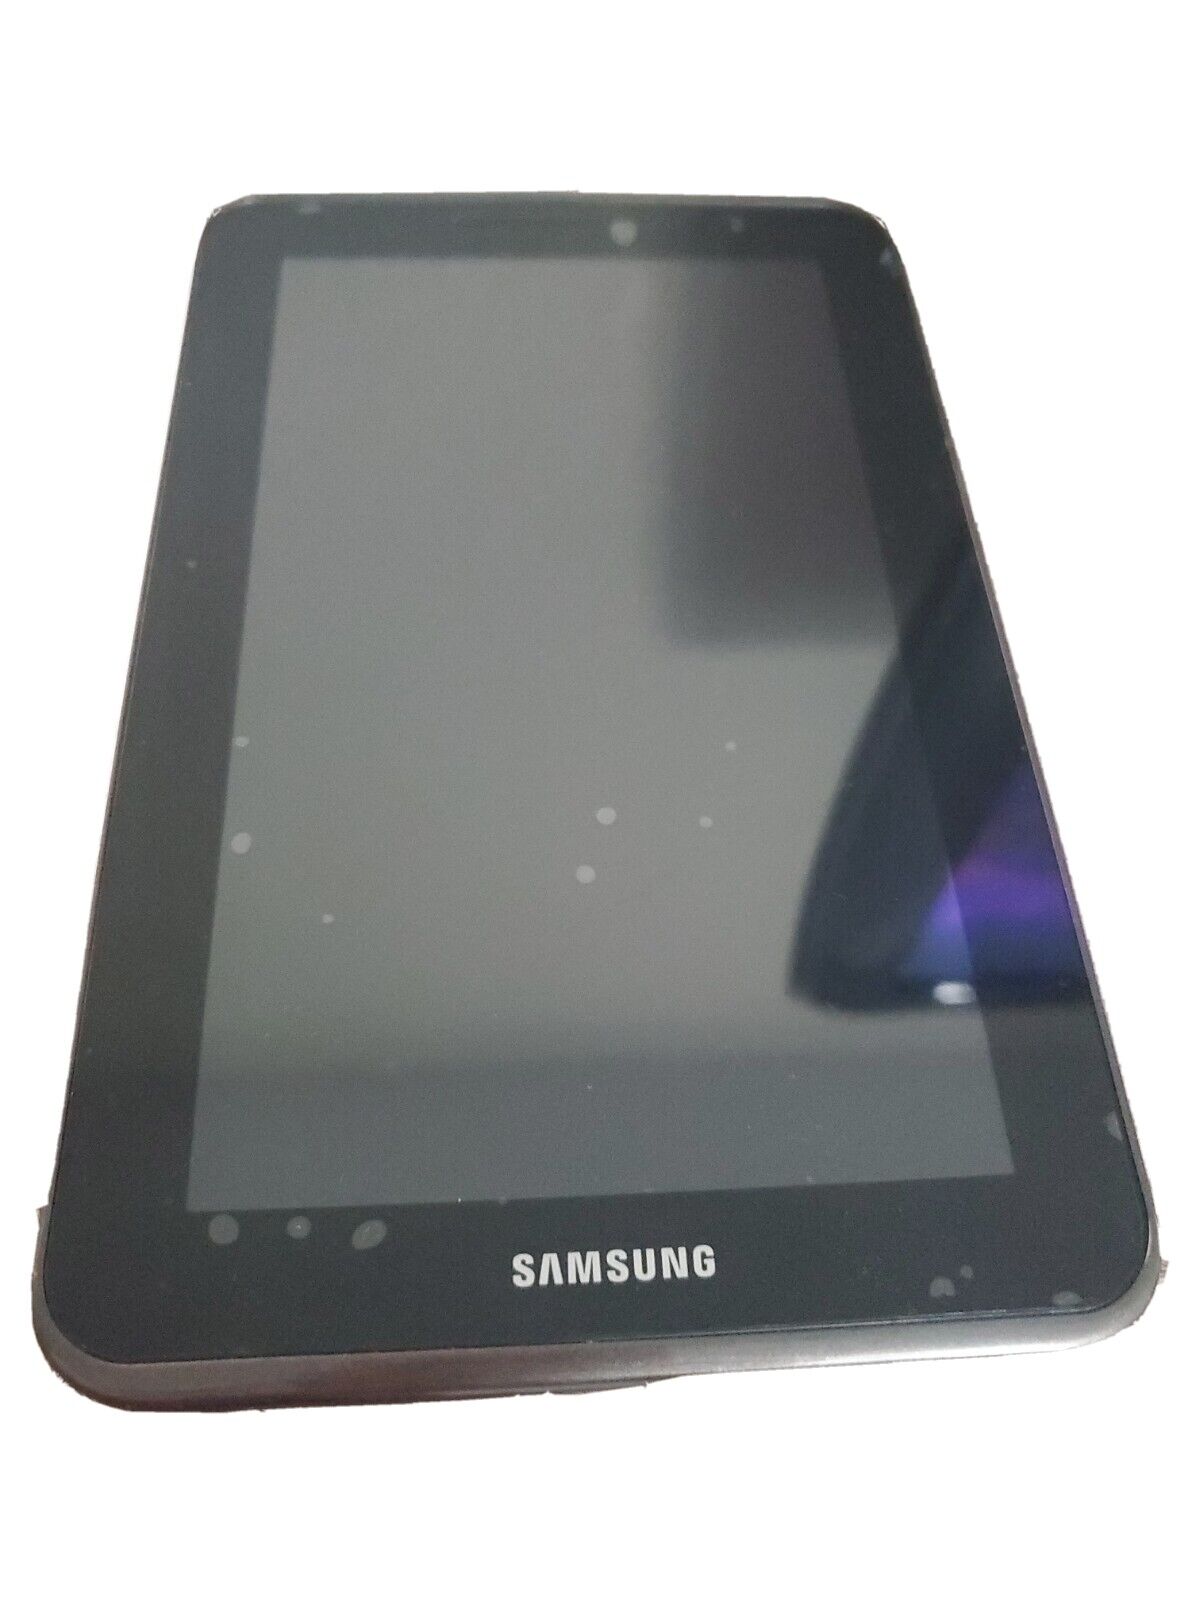 Samsung Galaxy Tab 2 GT-P3113TS 8GB Wifi - NO POWER Tablet Only Gray 7in